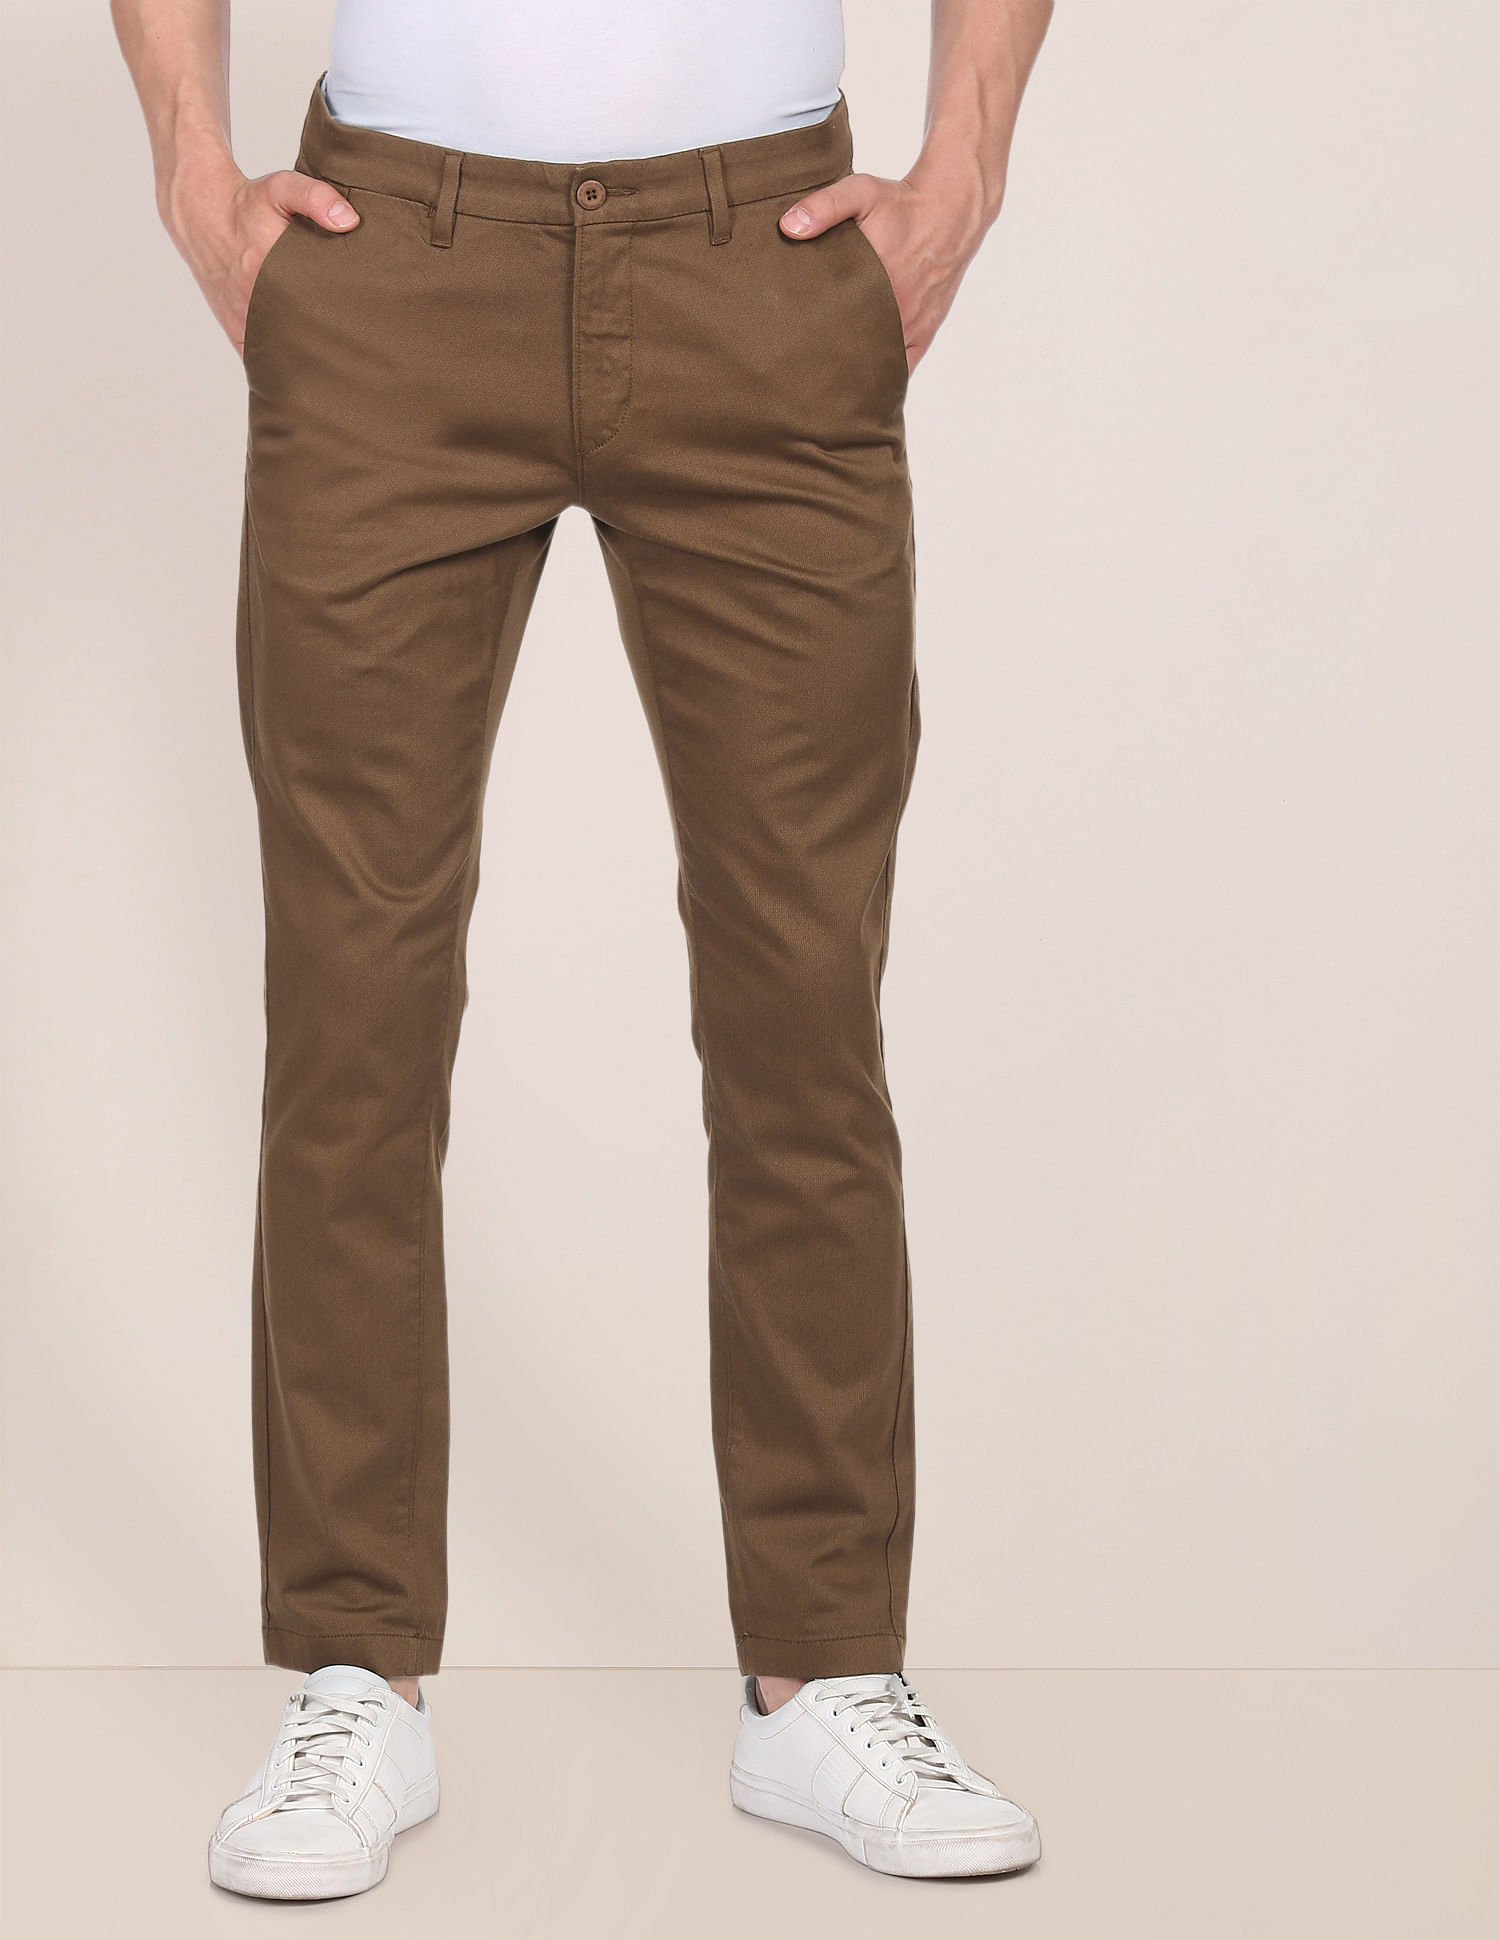 Buy Stylish Green Cotton Printed Trousers For Boys Online In India At  Discounted Prices